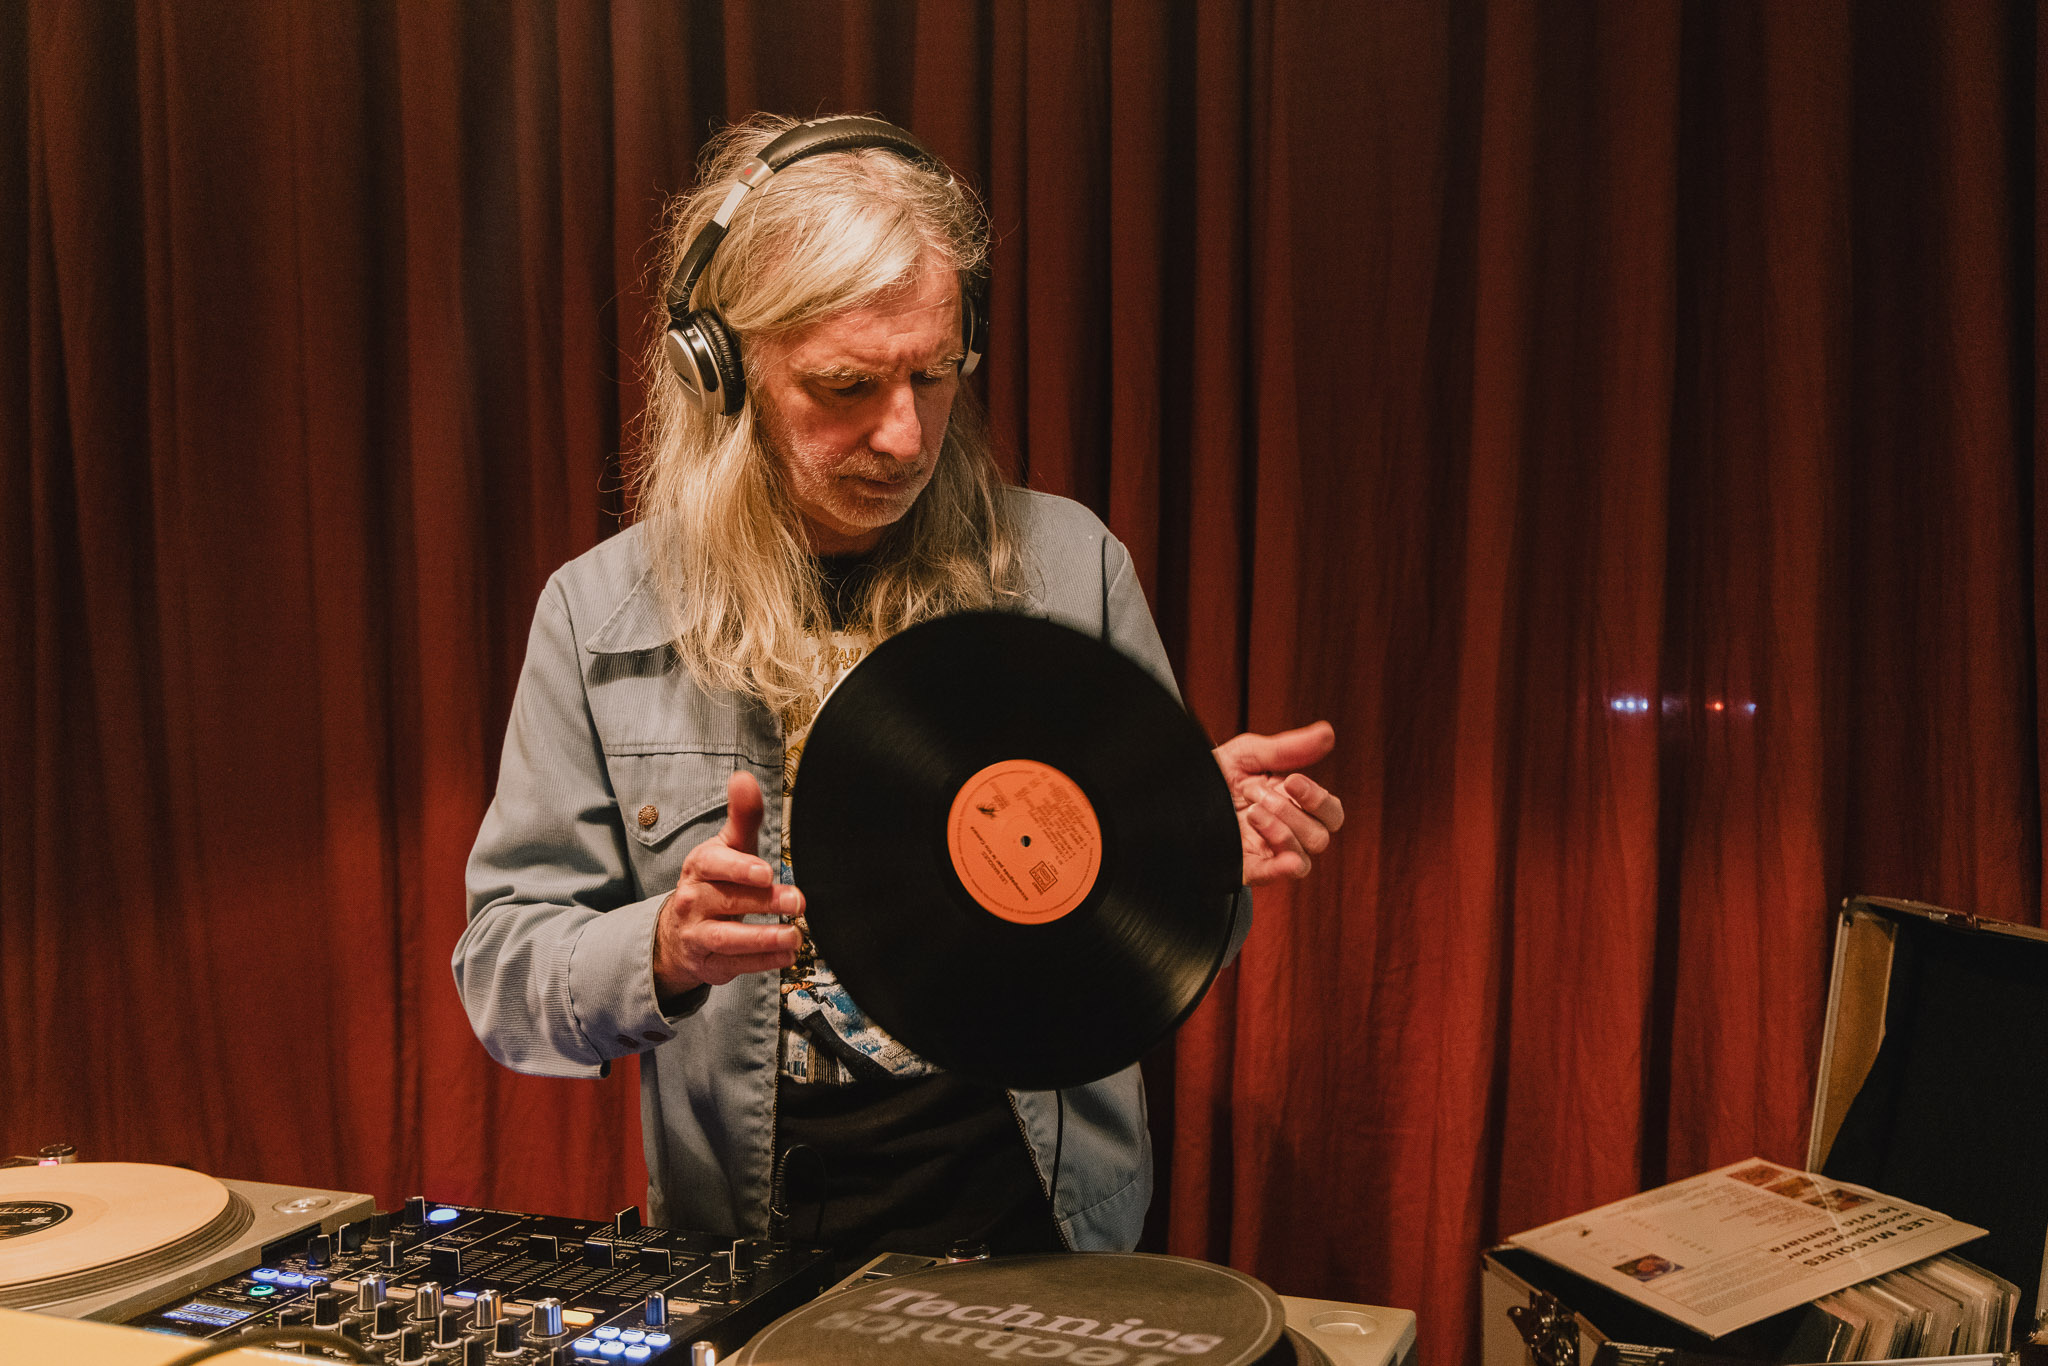 image of a person with long white hair holding a vinyl record while djing